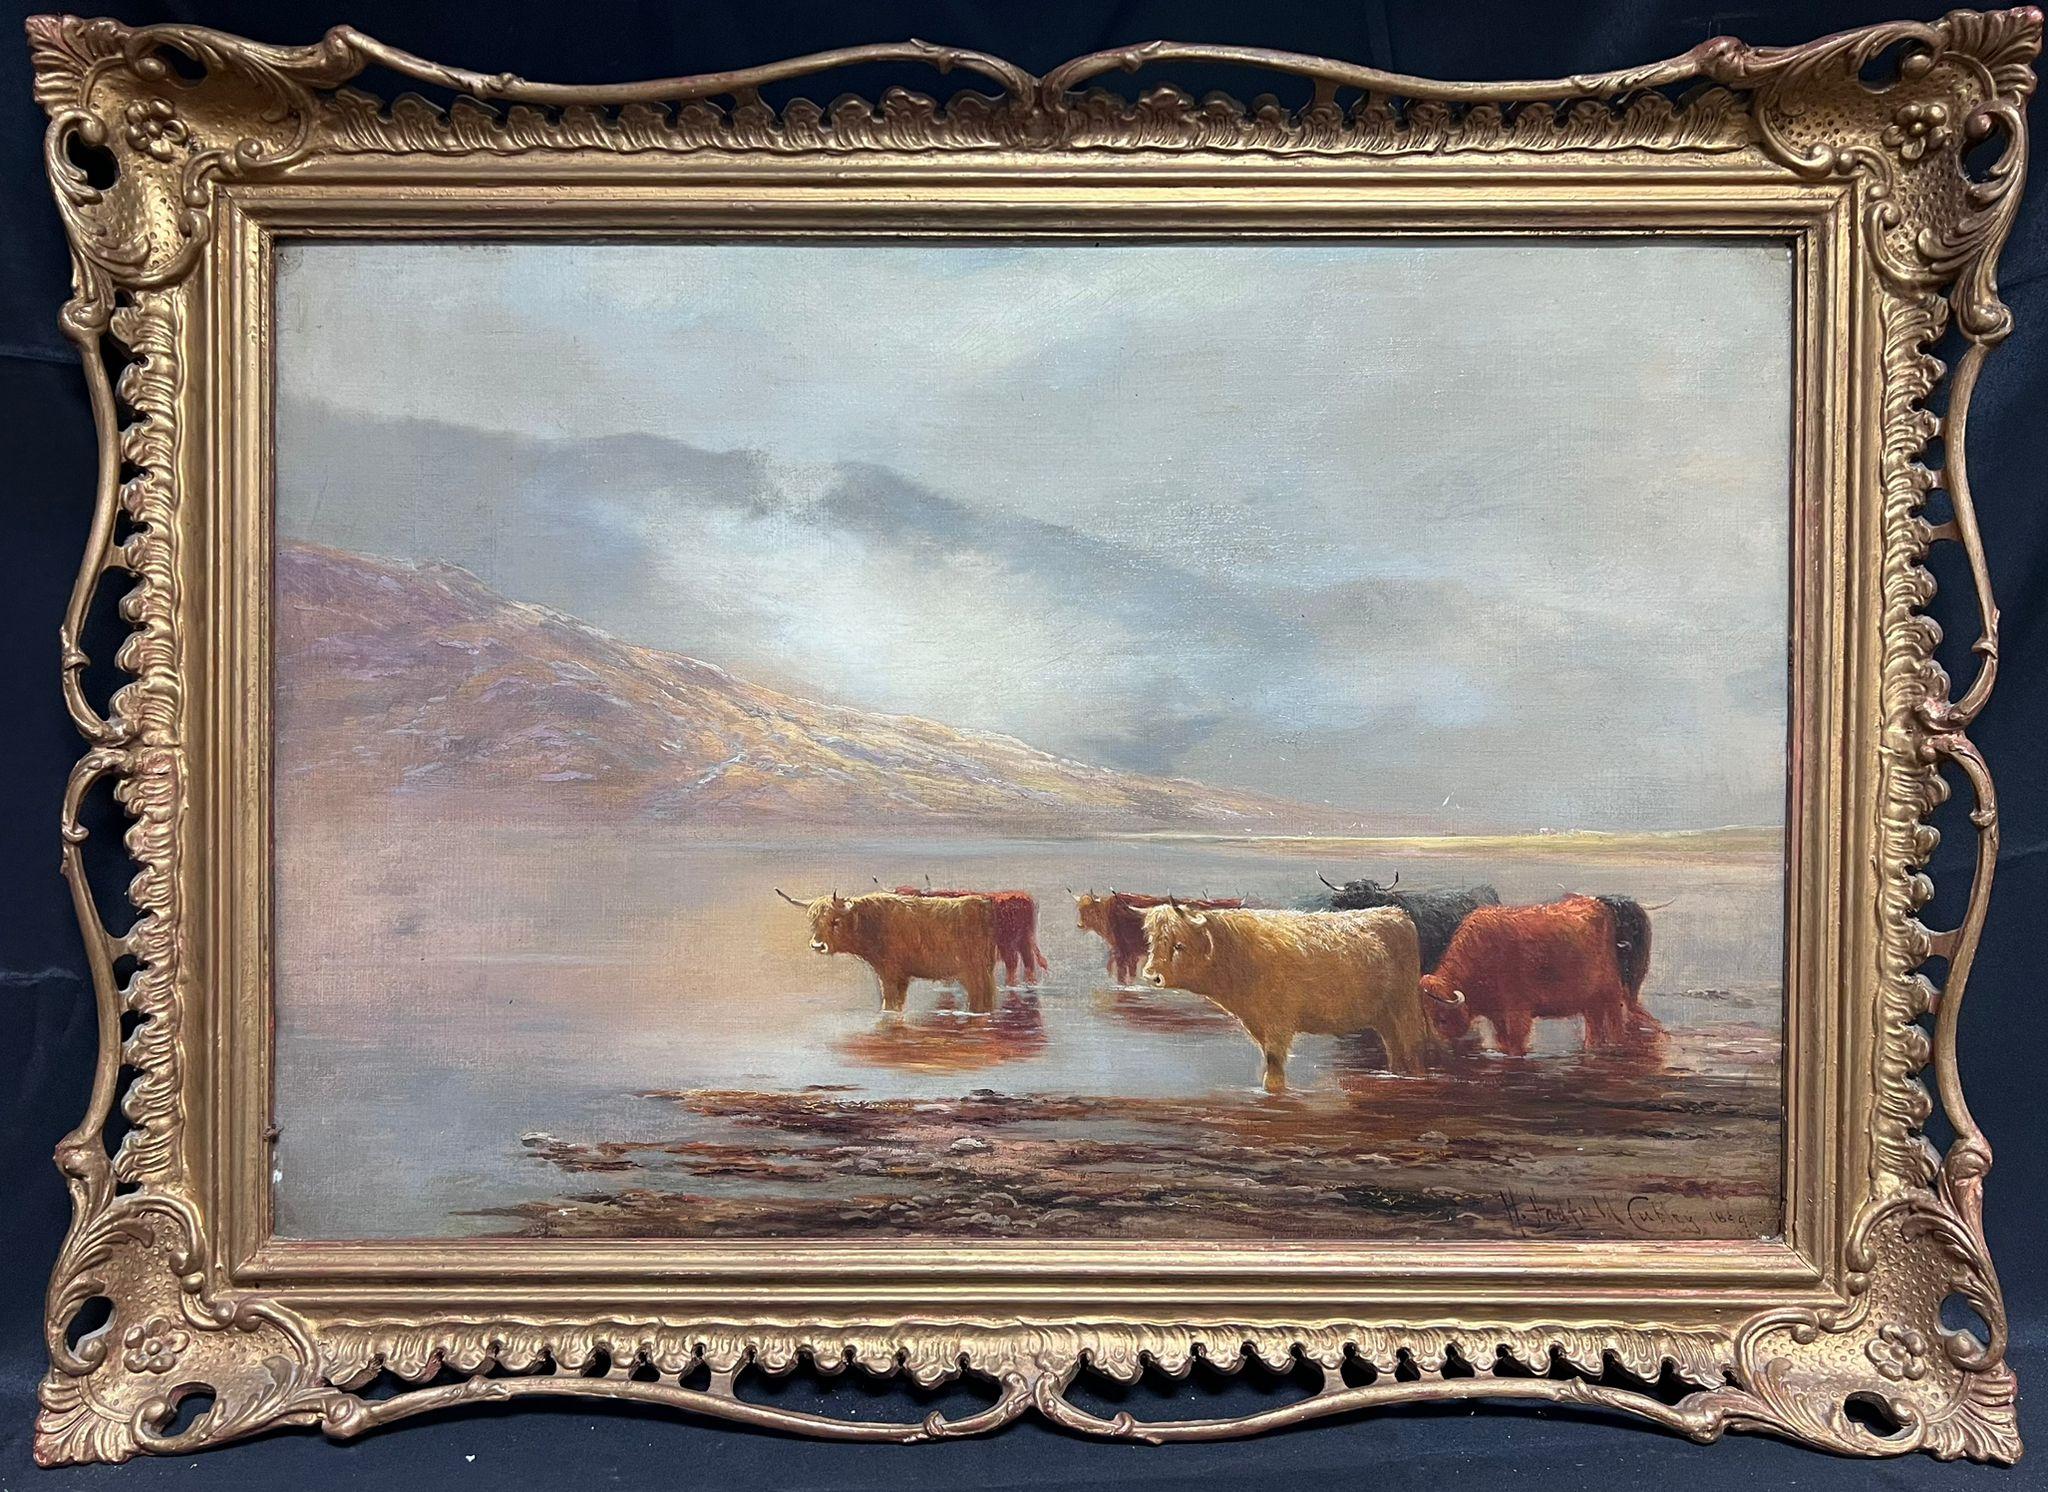 Henry Hadfield Cubley Landscape Painting - Large 19th Century Scottish Highland Cattle Loch Scene Signed Oil Painting